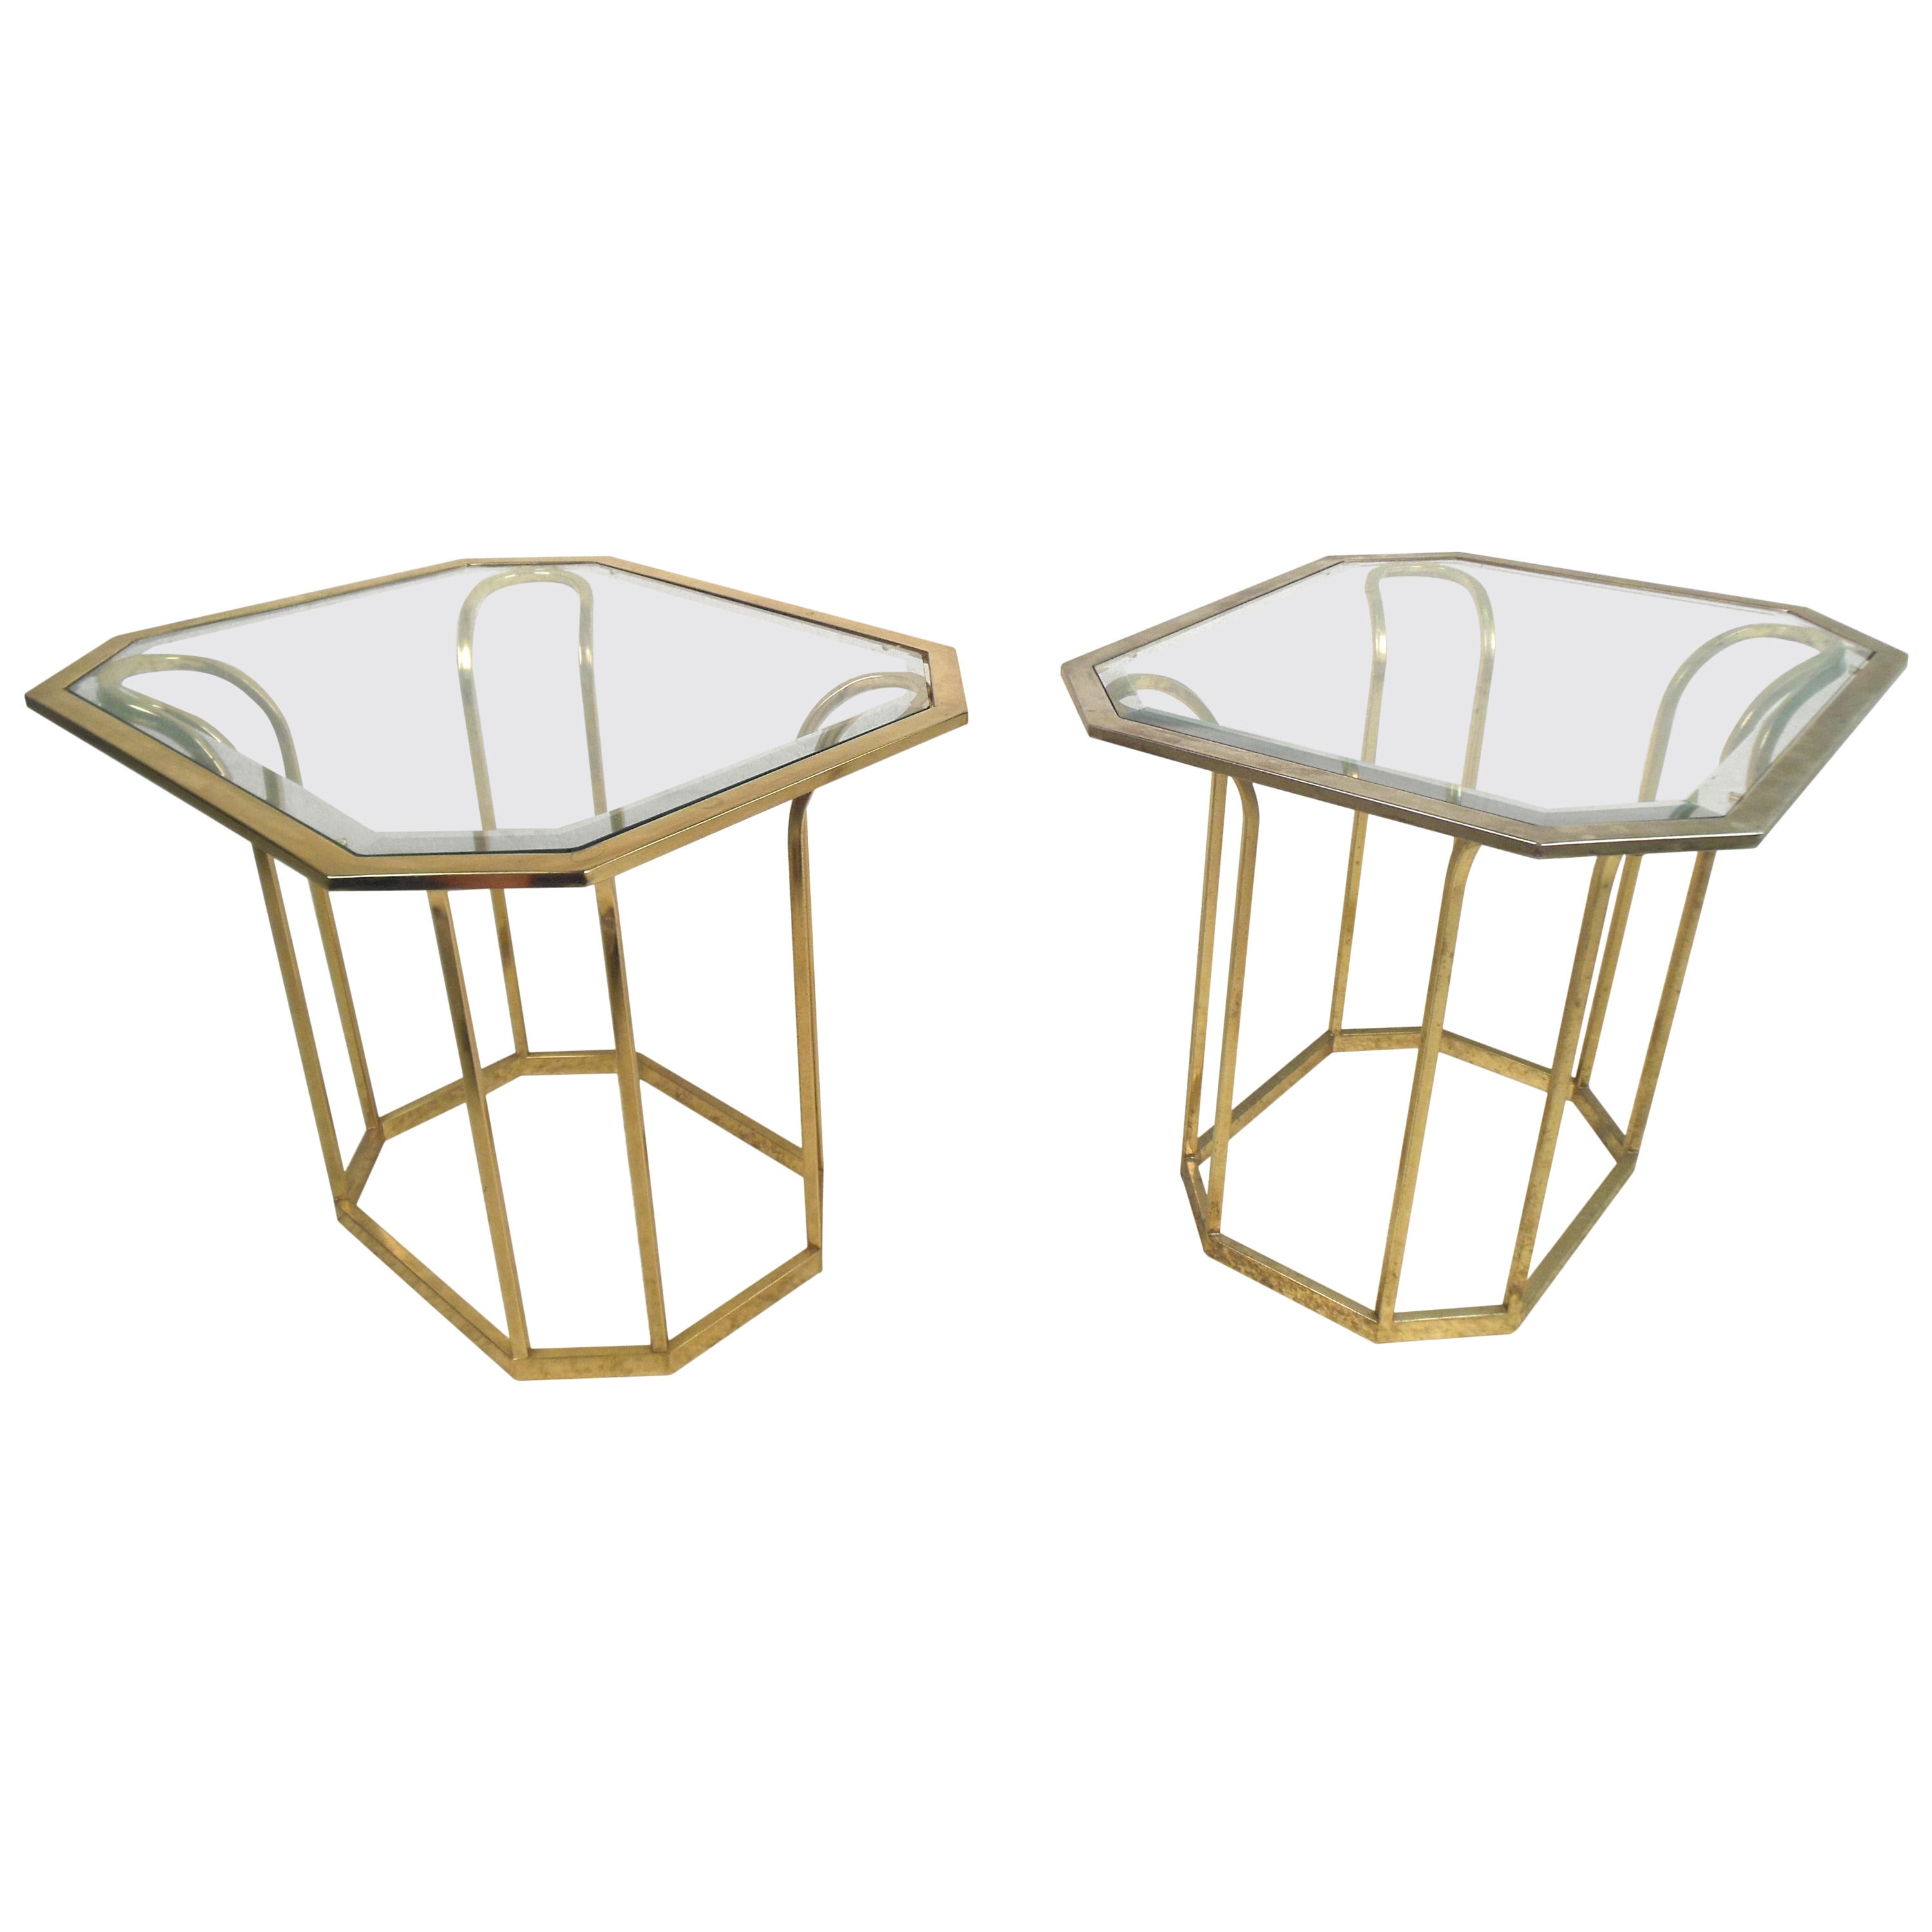 Pair of Brass Tulip Form End Tables